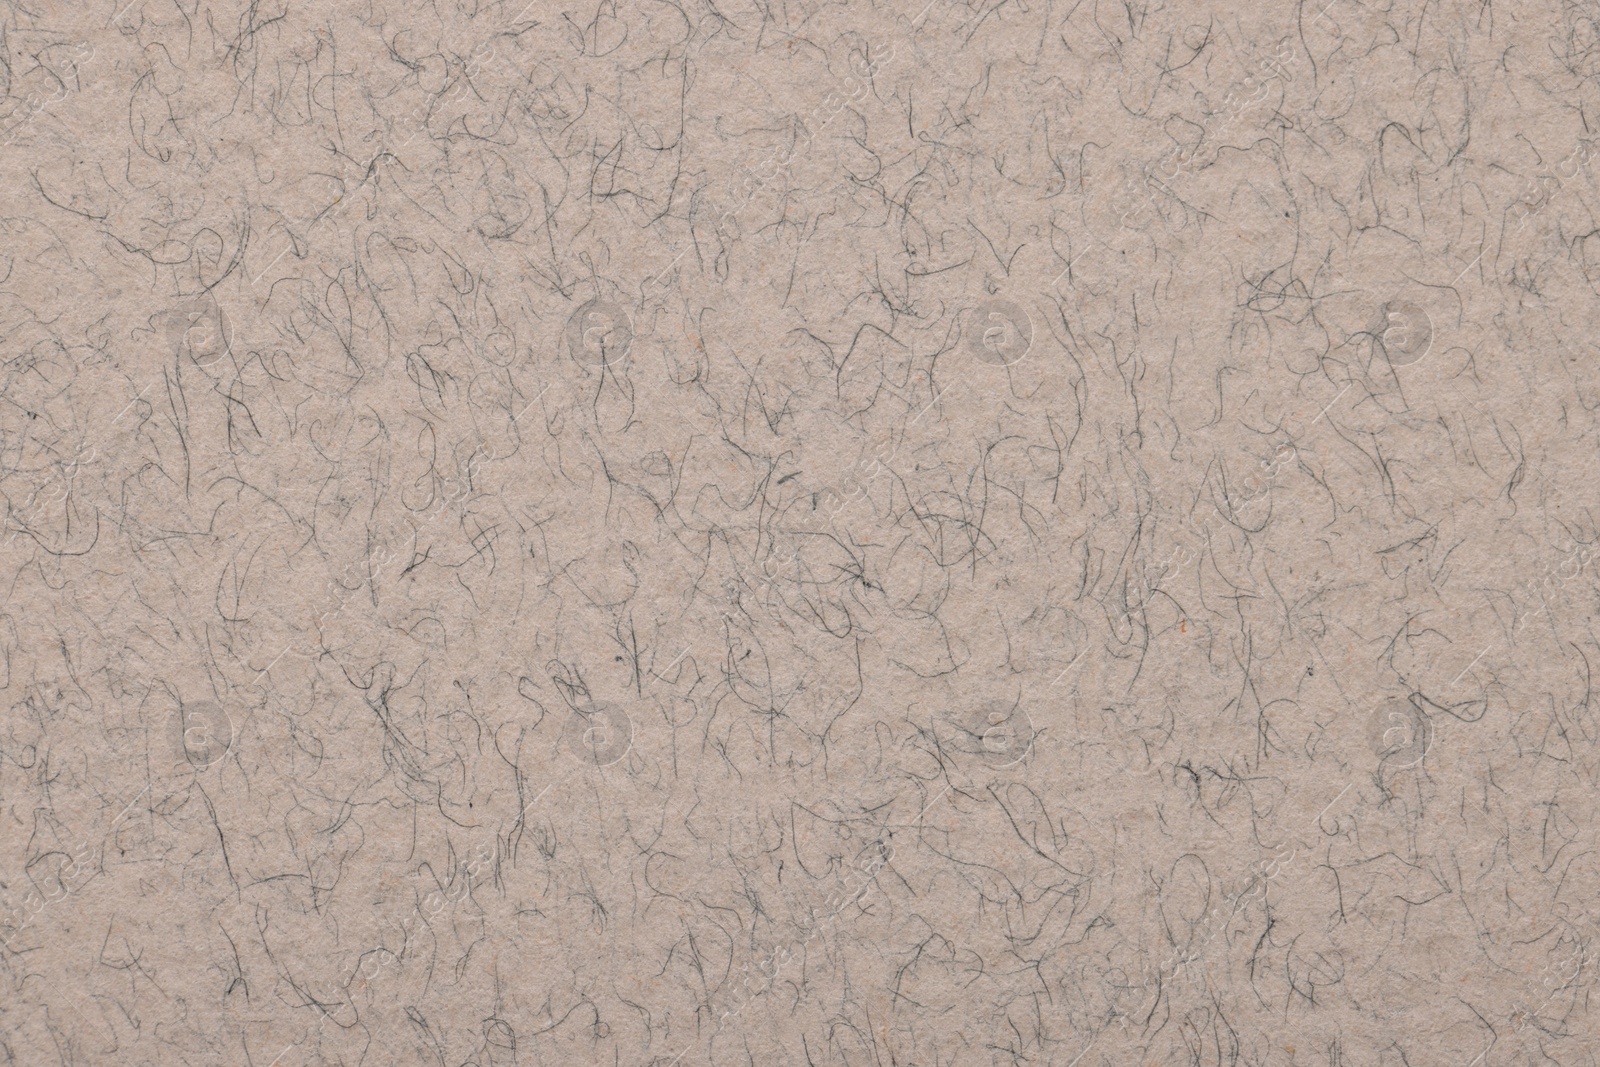 Photo of Texture of light grey paper sheet as background, top view